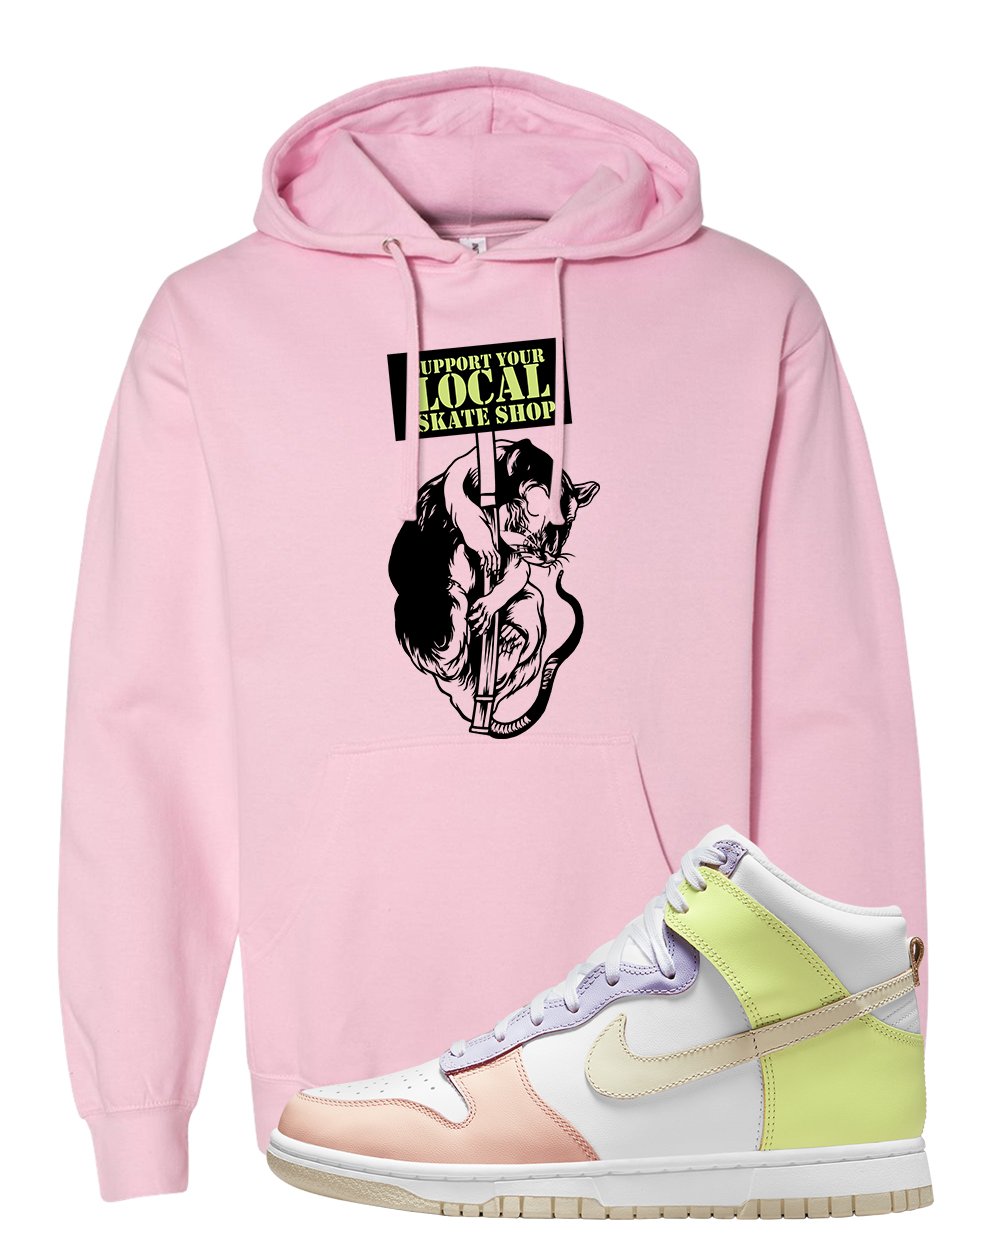 Cashmere High Dunks Hoodie | Support Your Local Skate Shop, Light Pink